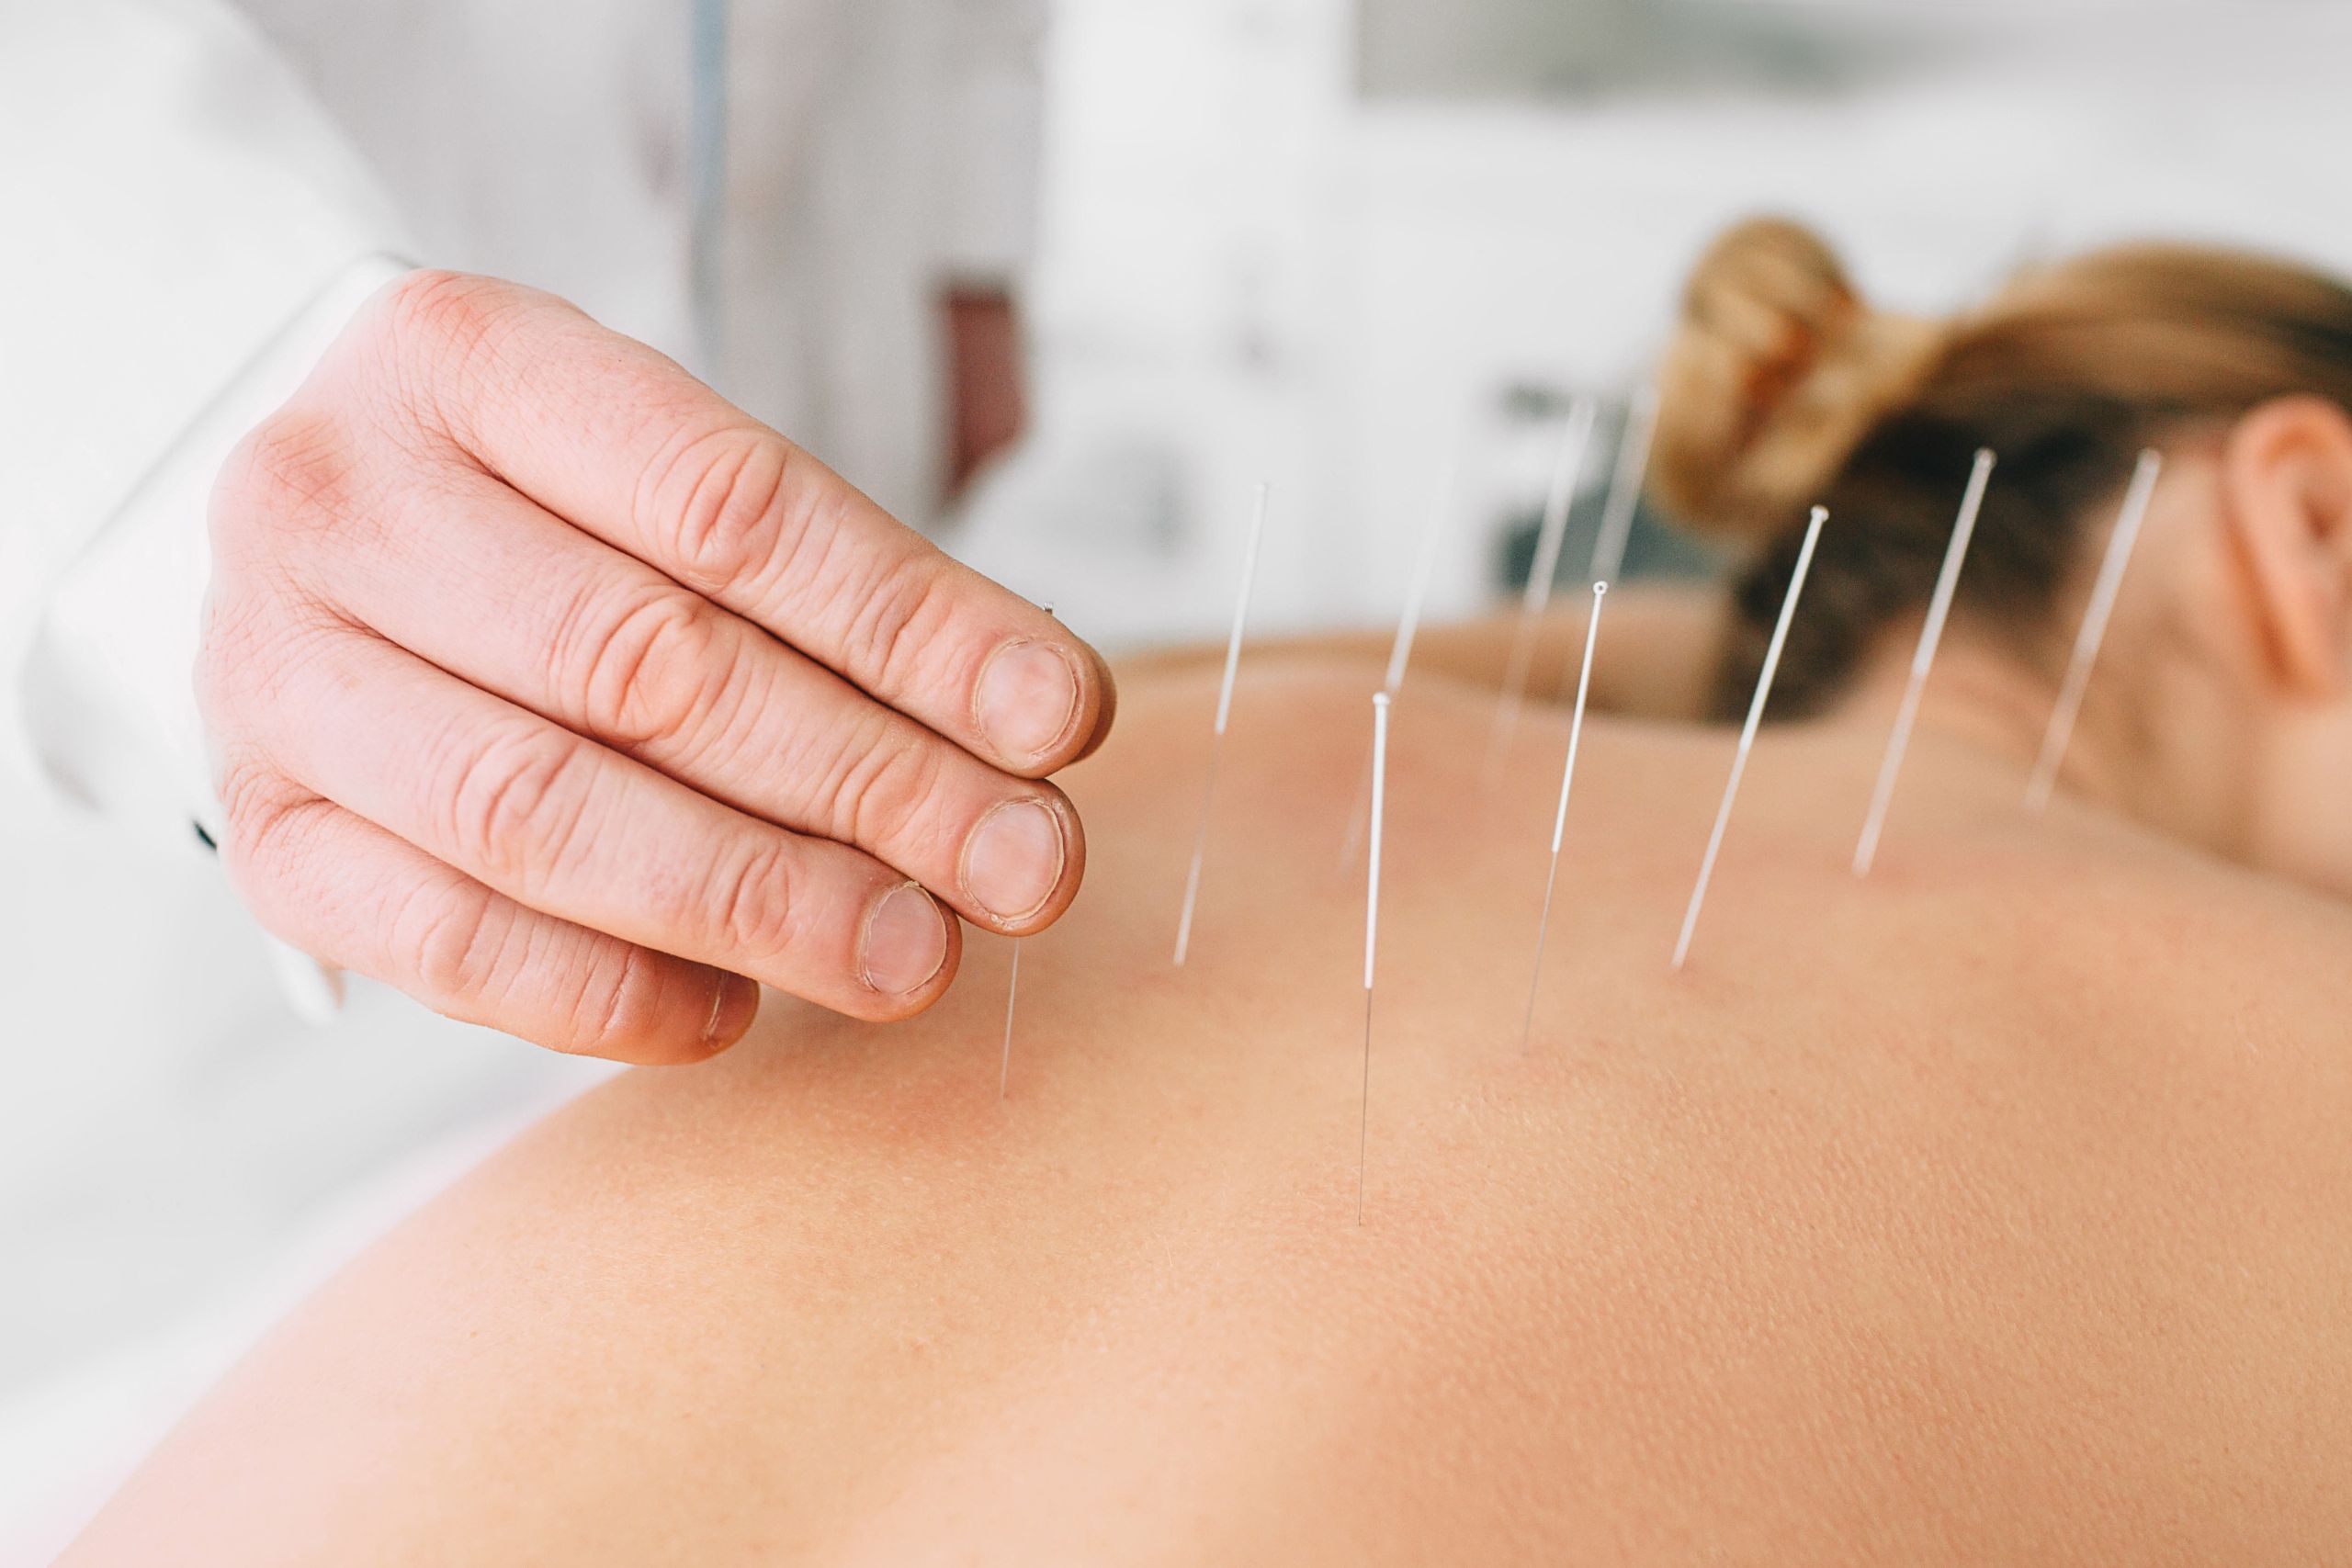 A close-up of a man's hand applying acupuncture needles into a woman's back